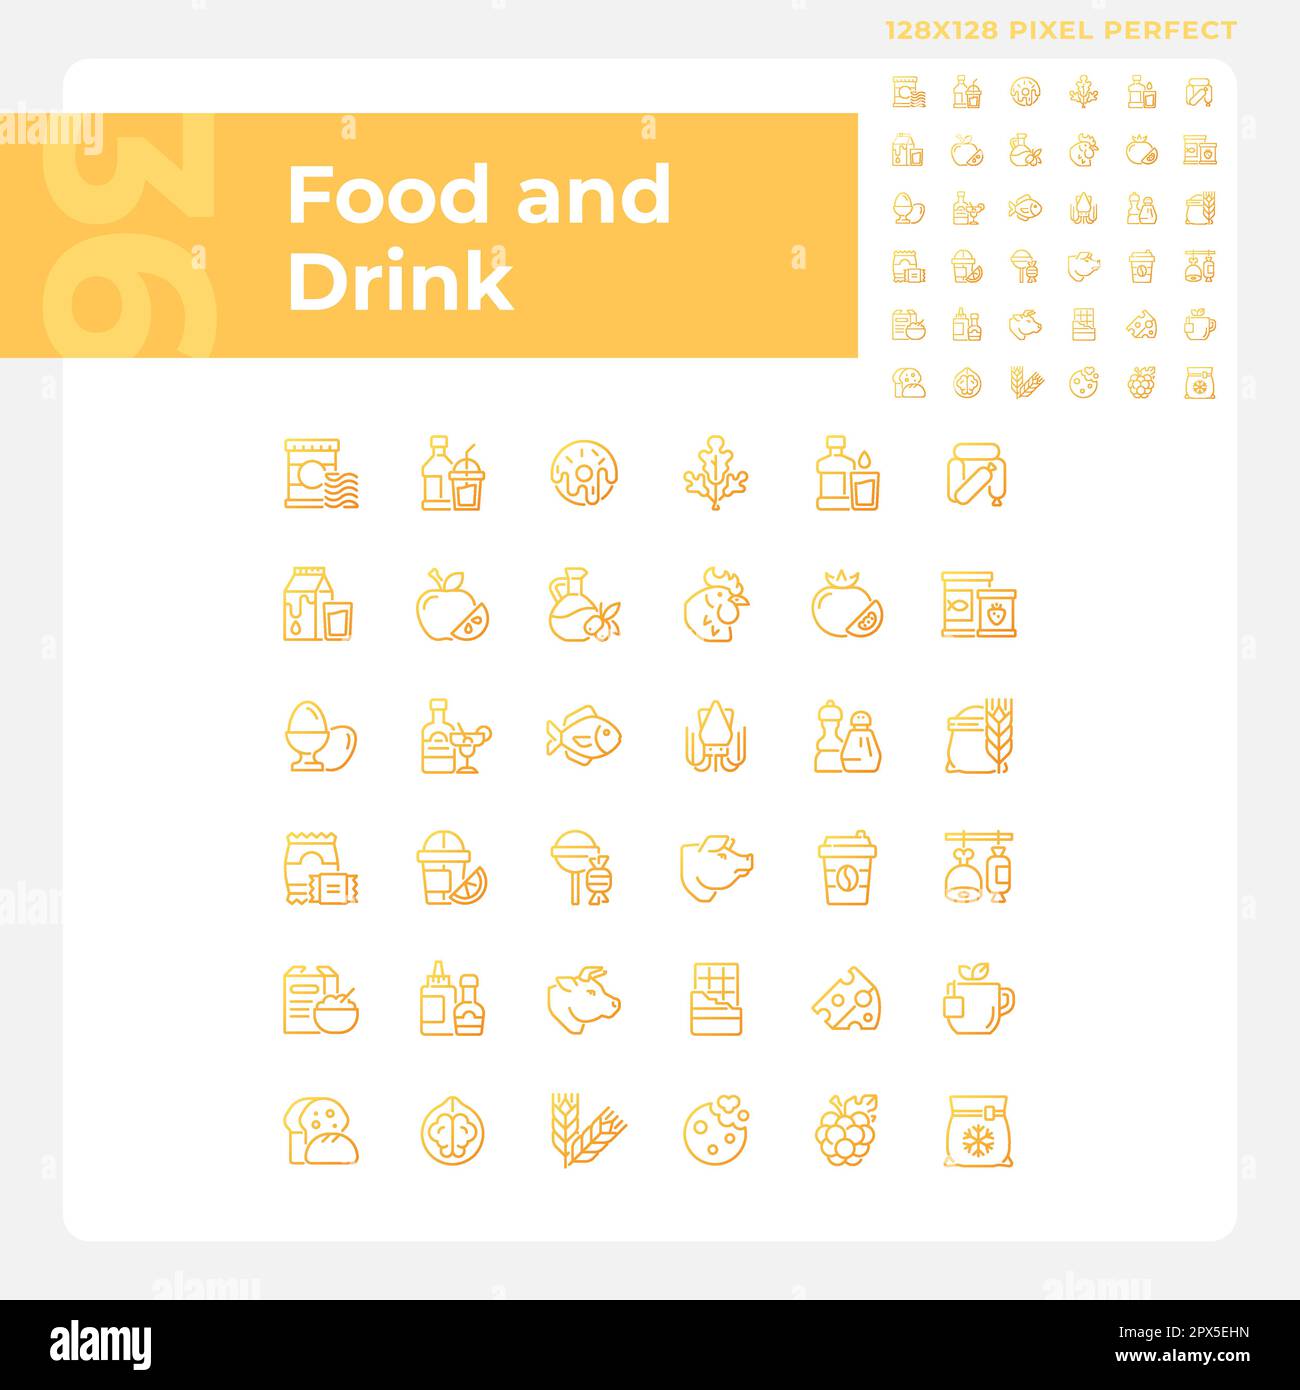 Food and drink pixel perfect gradient linear vector icons set Stock Vector